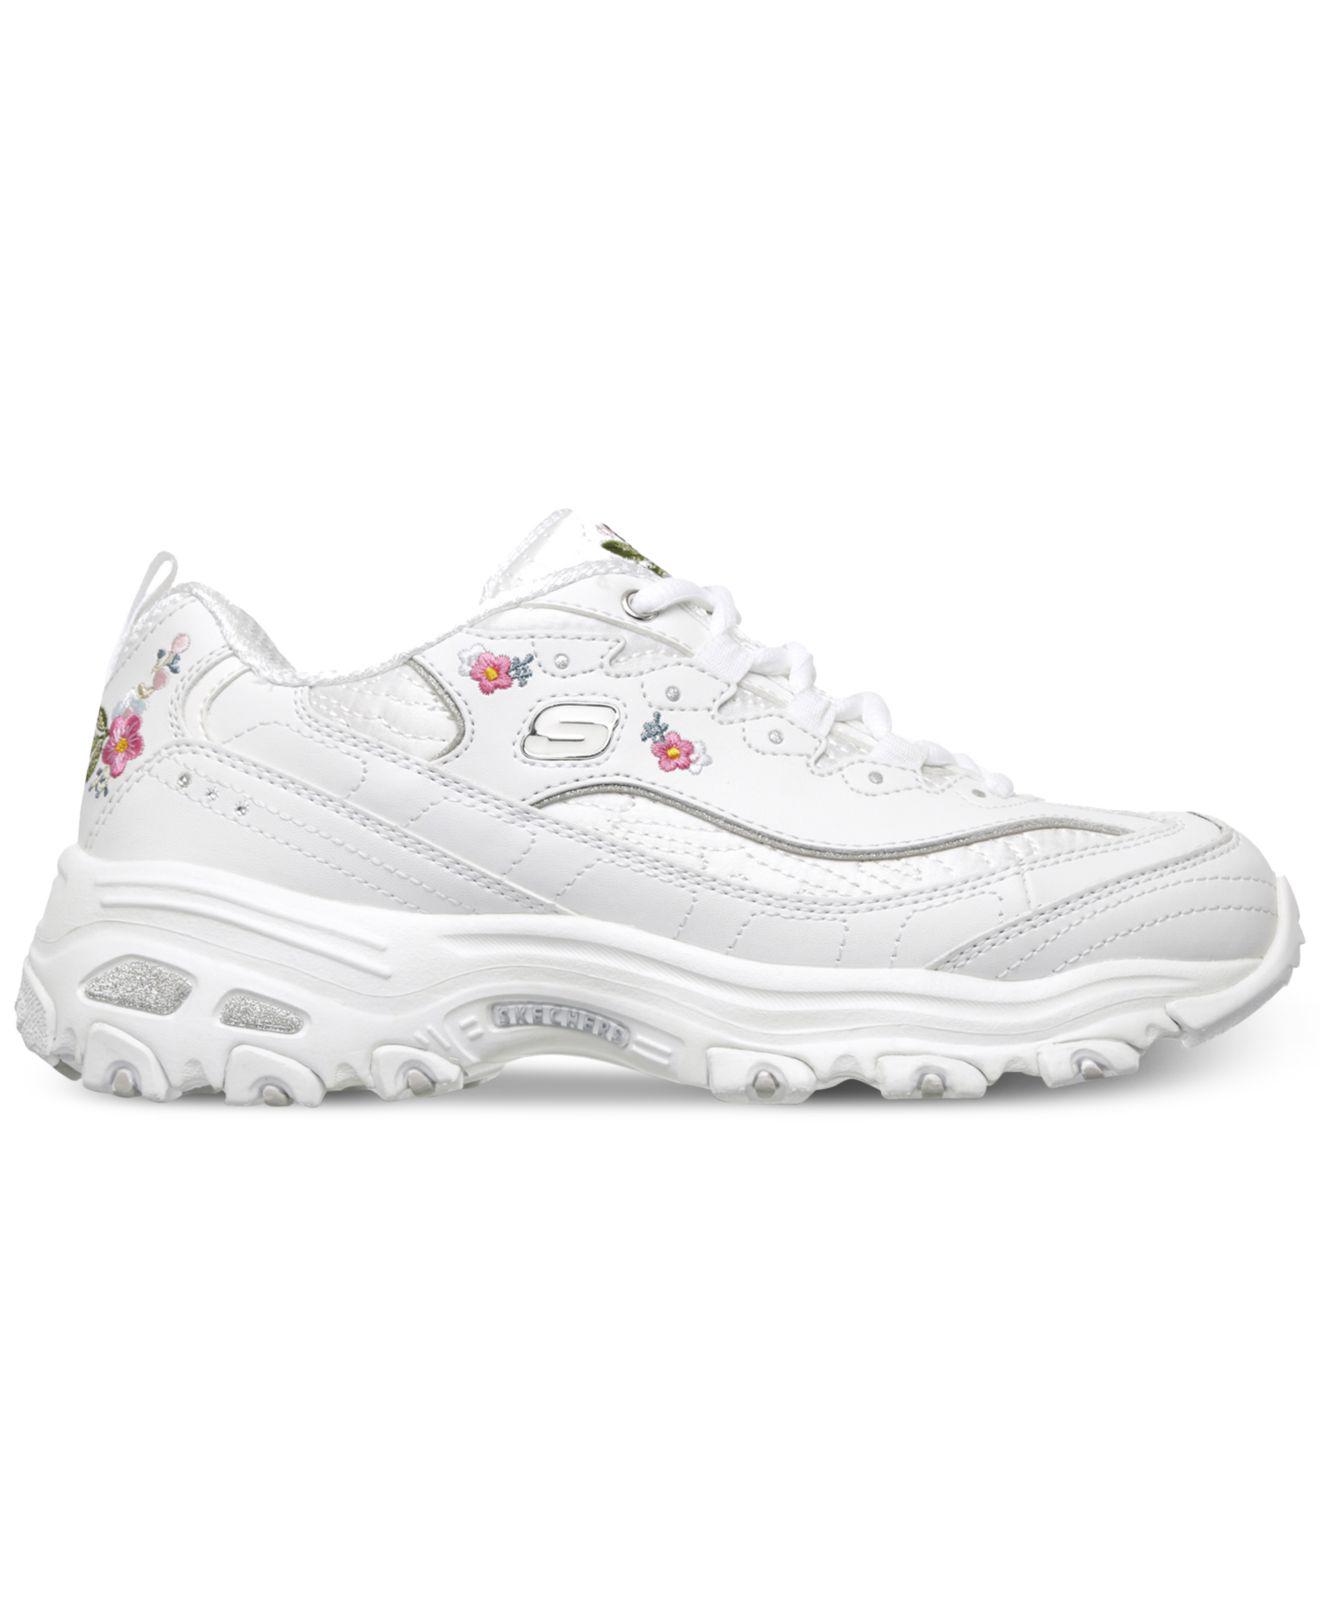 Skechers Leather Bright Blossoms Sneaker in White | Lyst